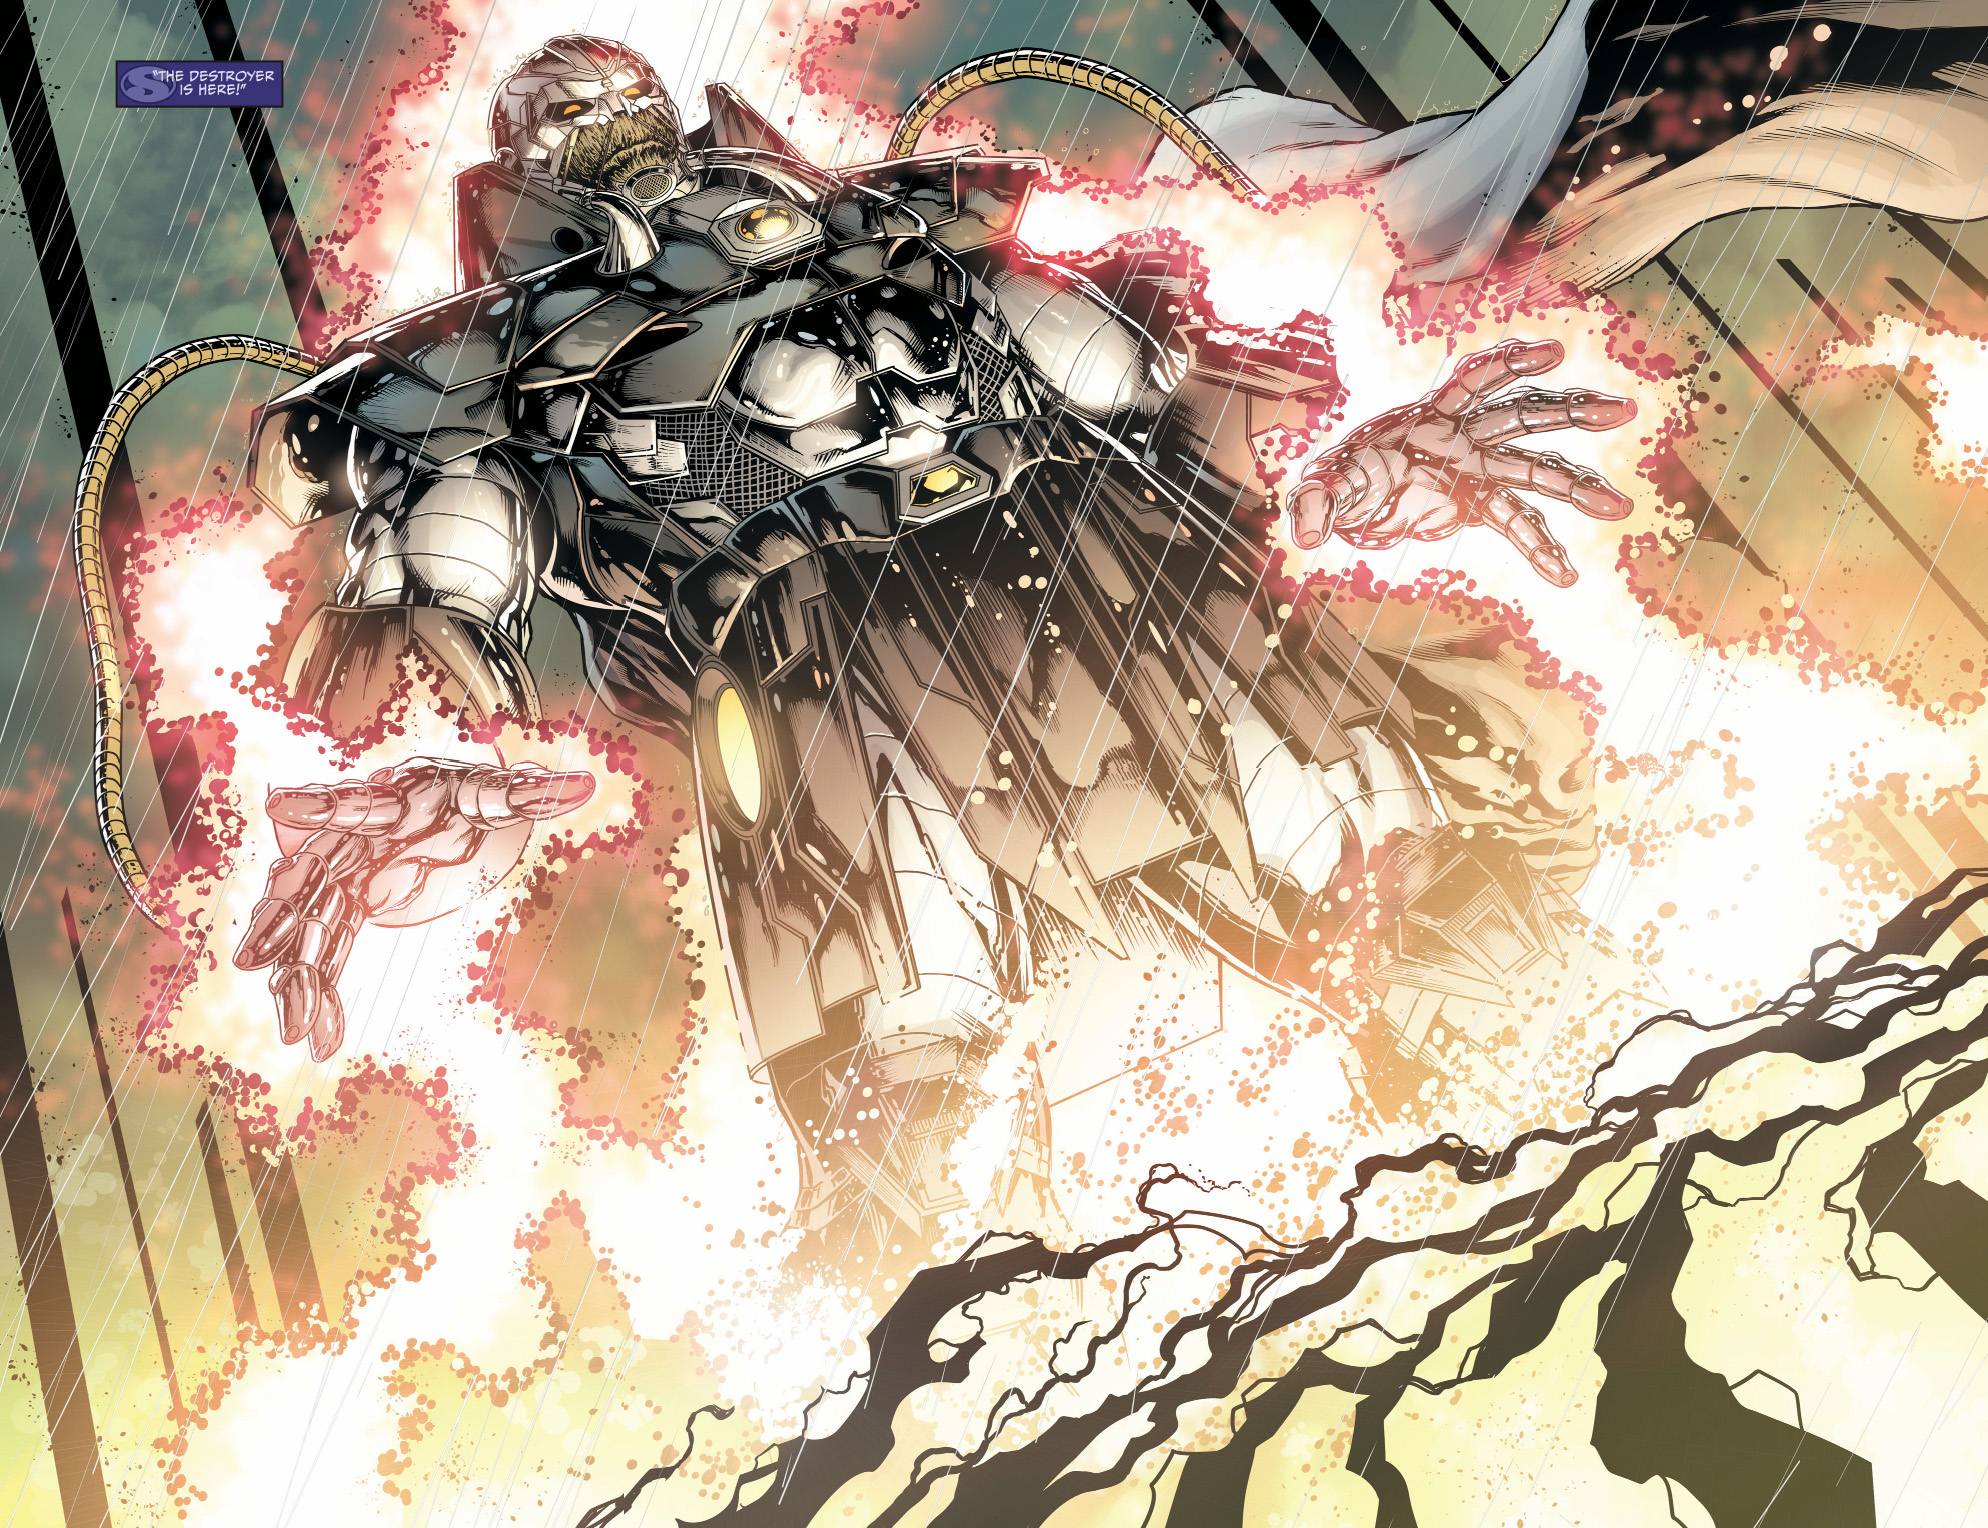 grail summons the anti-monitor to prime earth